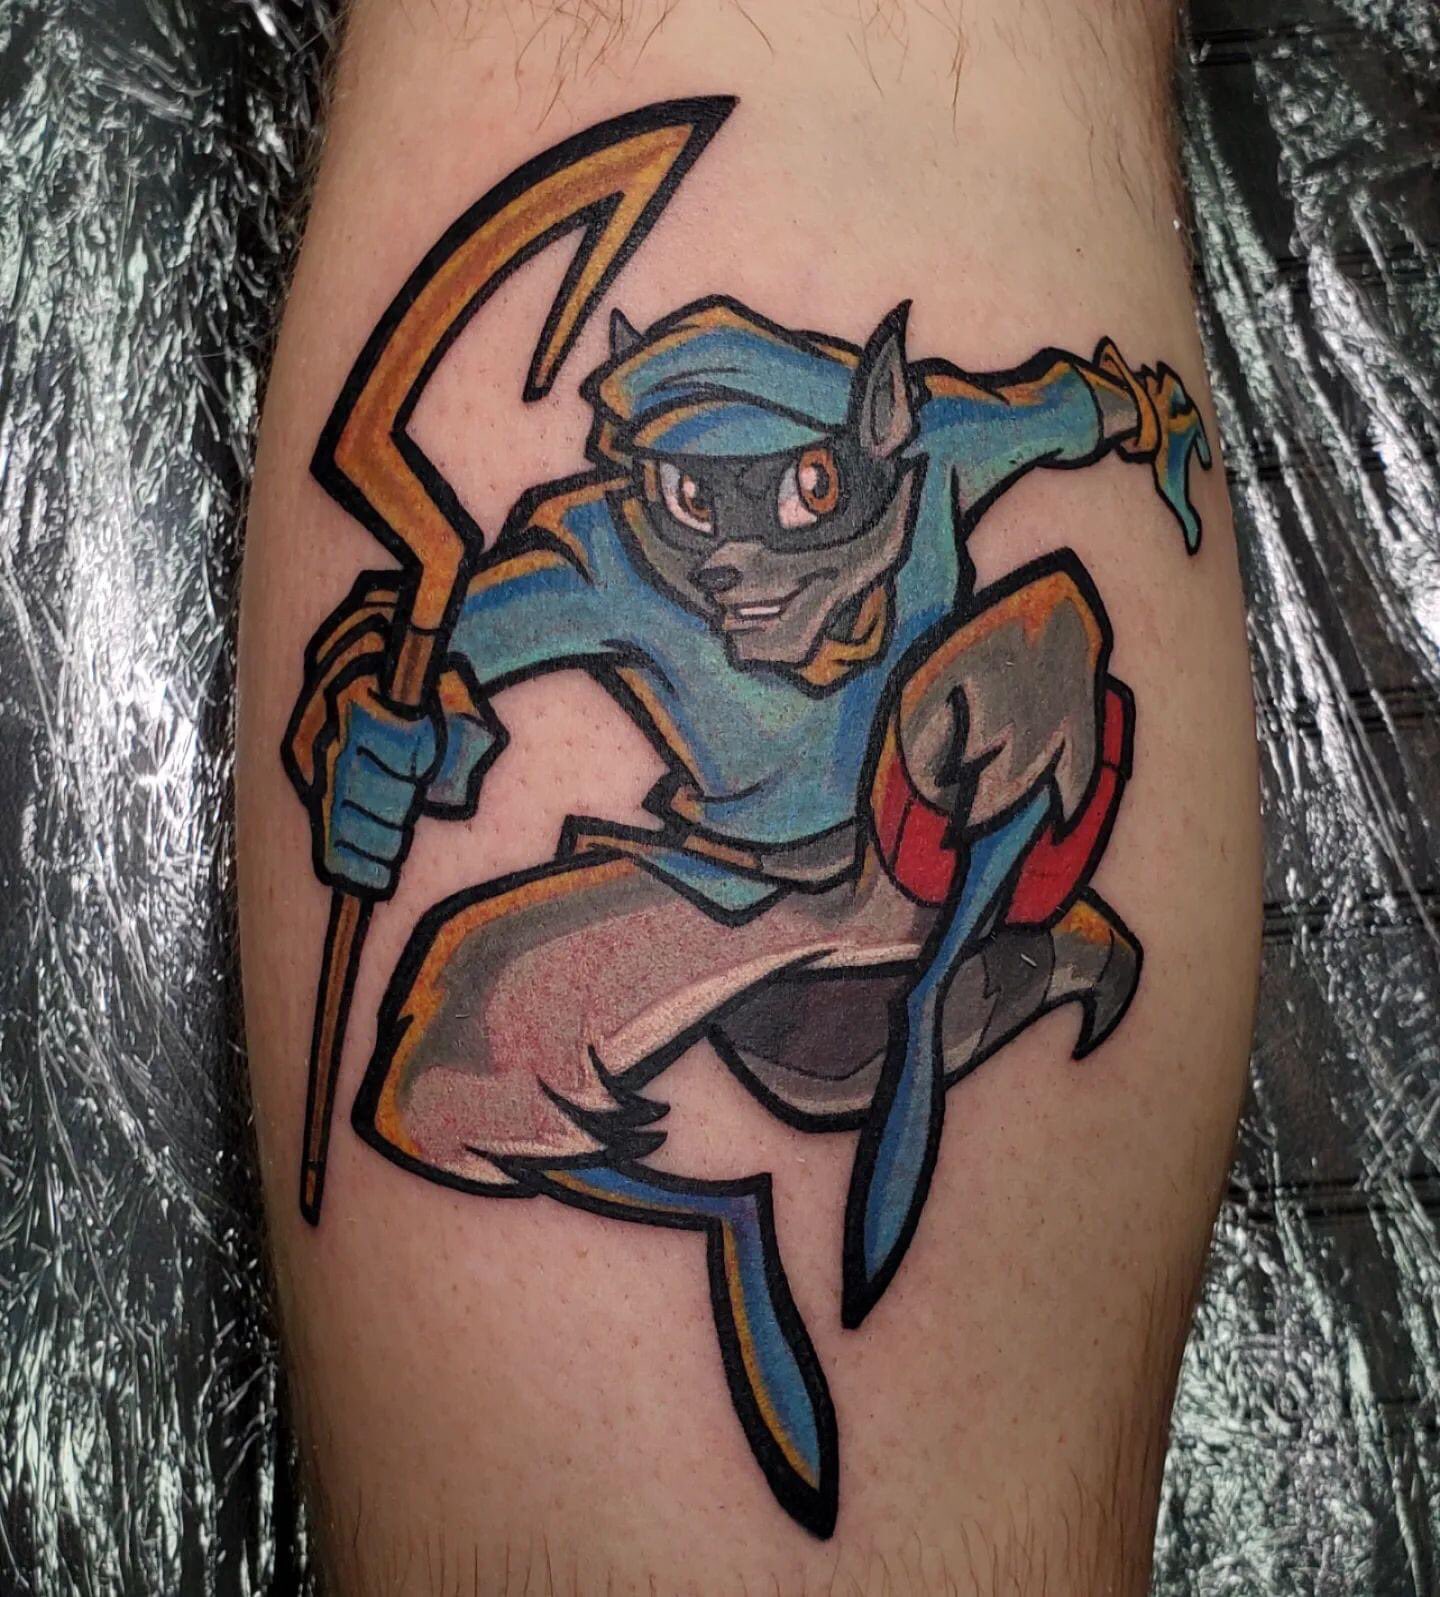 Twitter 上的CHRISCANCELL TATTOOTattooed Sly Cooper tattoo sly inked  tattooartist httpstco4d6s56Enyg  Twitter